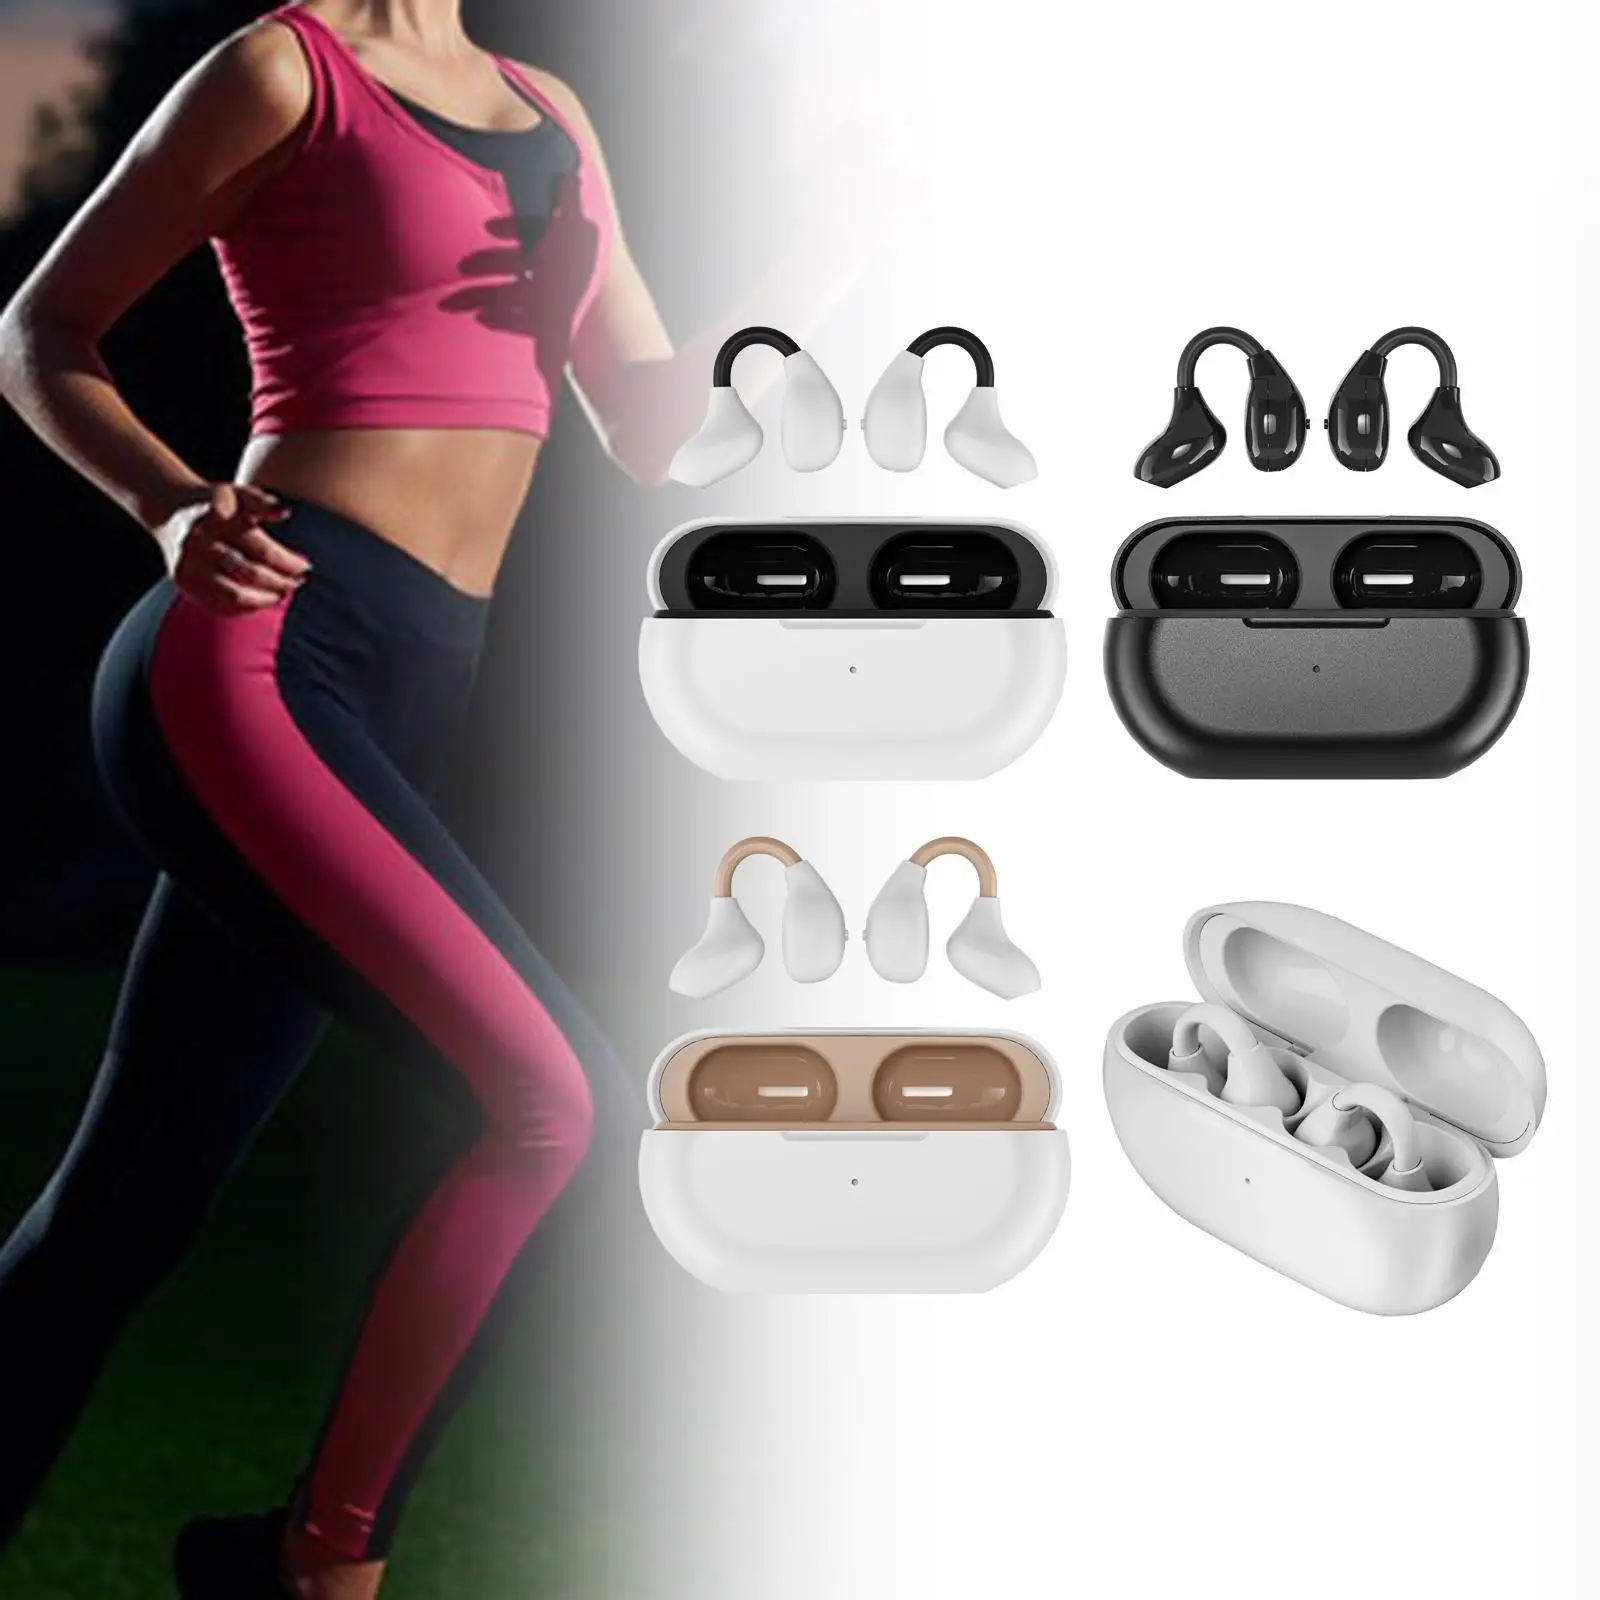 Clip On Wireless Headset V5.3 Low Latency Hands Free Calling Headphones Earpiece for Running Business Office Sports Fitness